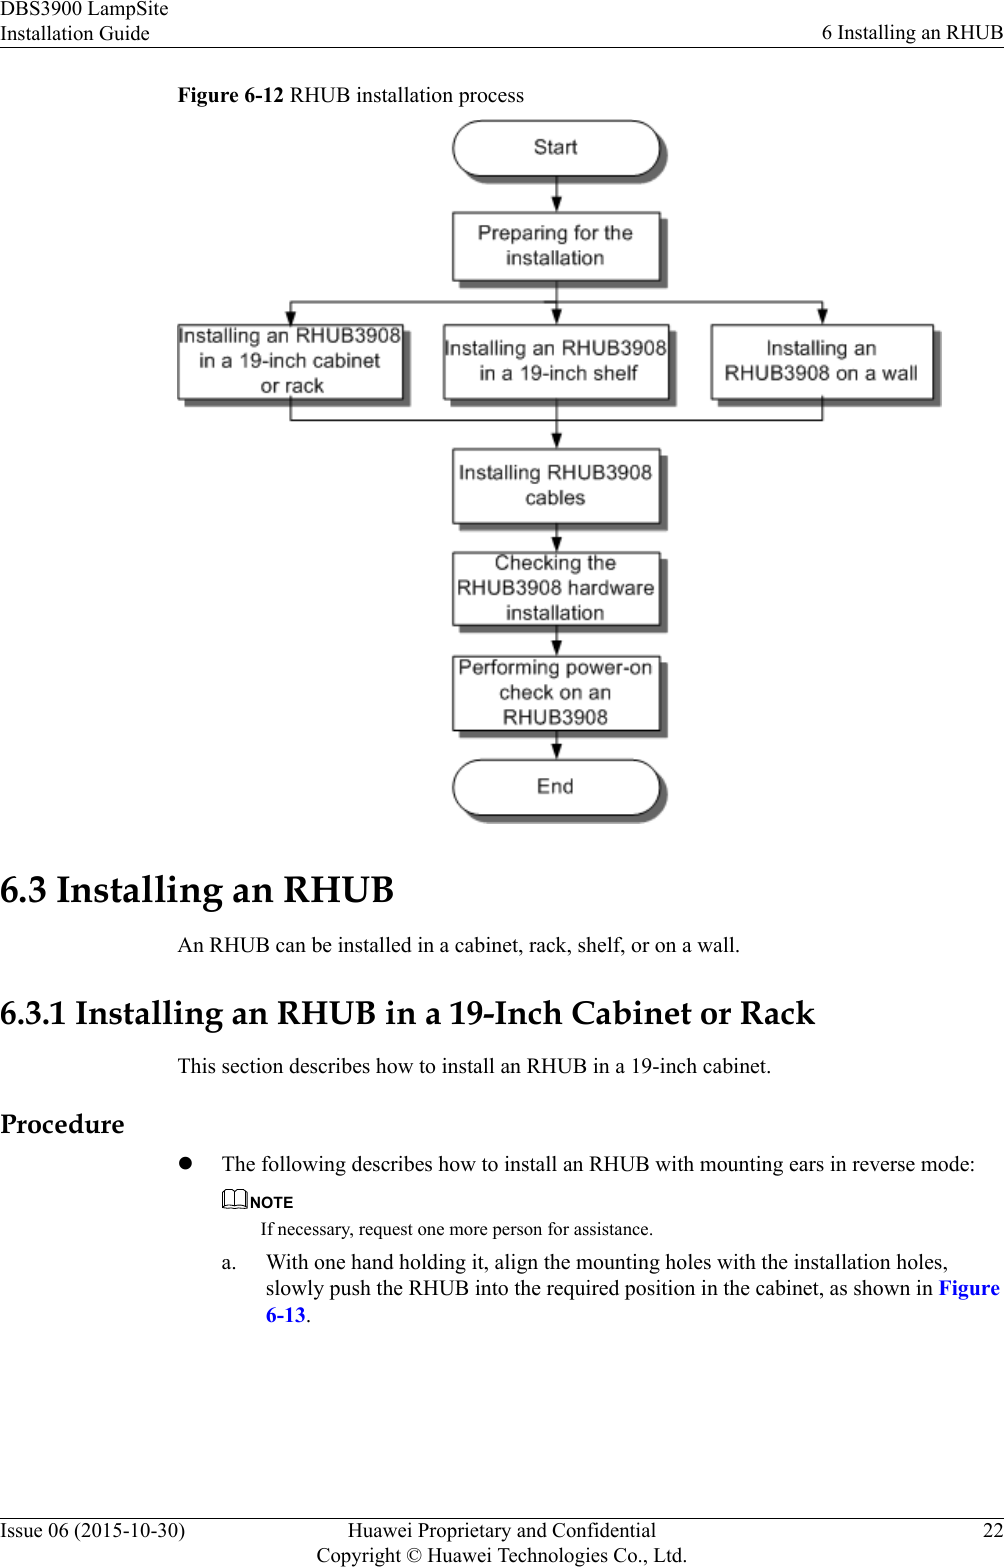 Figure 6-12 RHUB installation process6.3 Installing an RHUBAn RHUB can be installed in a cabinet, rack, shelf, or on a wall.6.3.1 Installing an RHUB in a 19-Inch Cabinet or RackThis section describes how to install an RHUB in a 19-inch cabinet.ProcedurelThe following describes how to install an RHUB with mounting ears in reverse mode:NOTEIf necessary, request one more person for assistance.a. With one hand holding it, align the mounting holes with the installation holes,slowly push the RHUB into the required position in the cabinet, as shown in Figure6-13.DBS3900 LampSiteInstallation Guide 6 Installing an RHUBIssue 06 (2015-10-30) Huawei Proprietary and ConfidentialCopyright © Huawei Technologies Co., Ltd.22